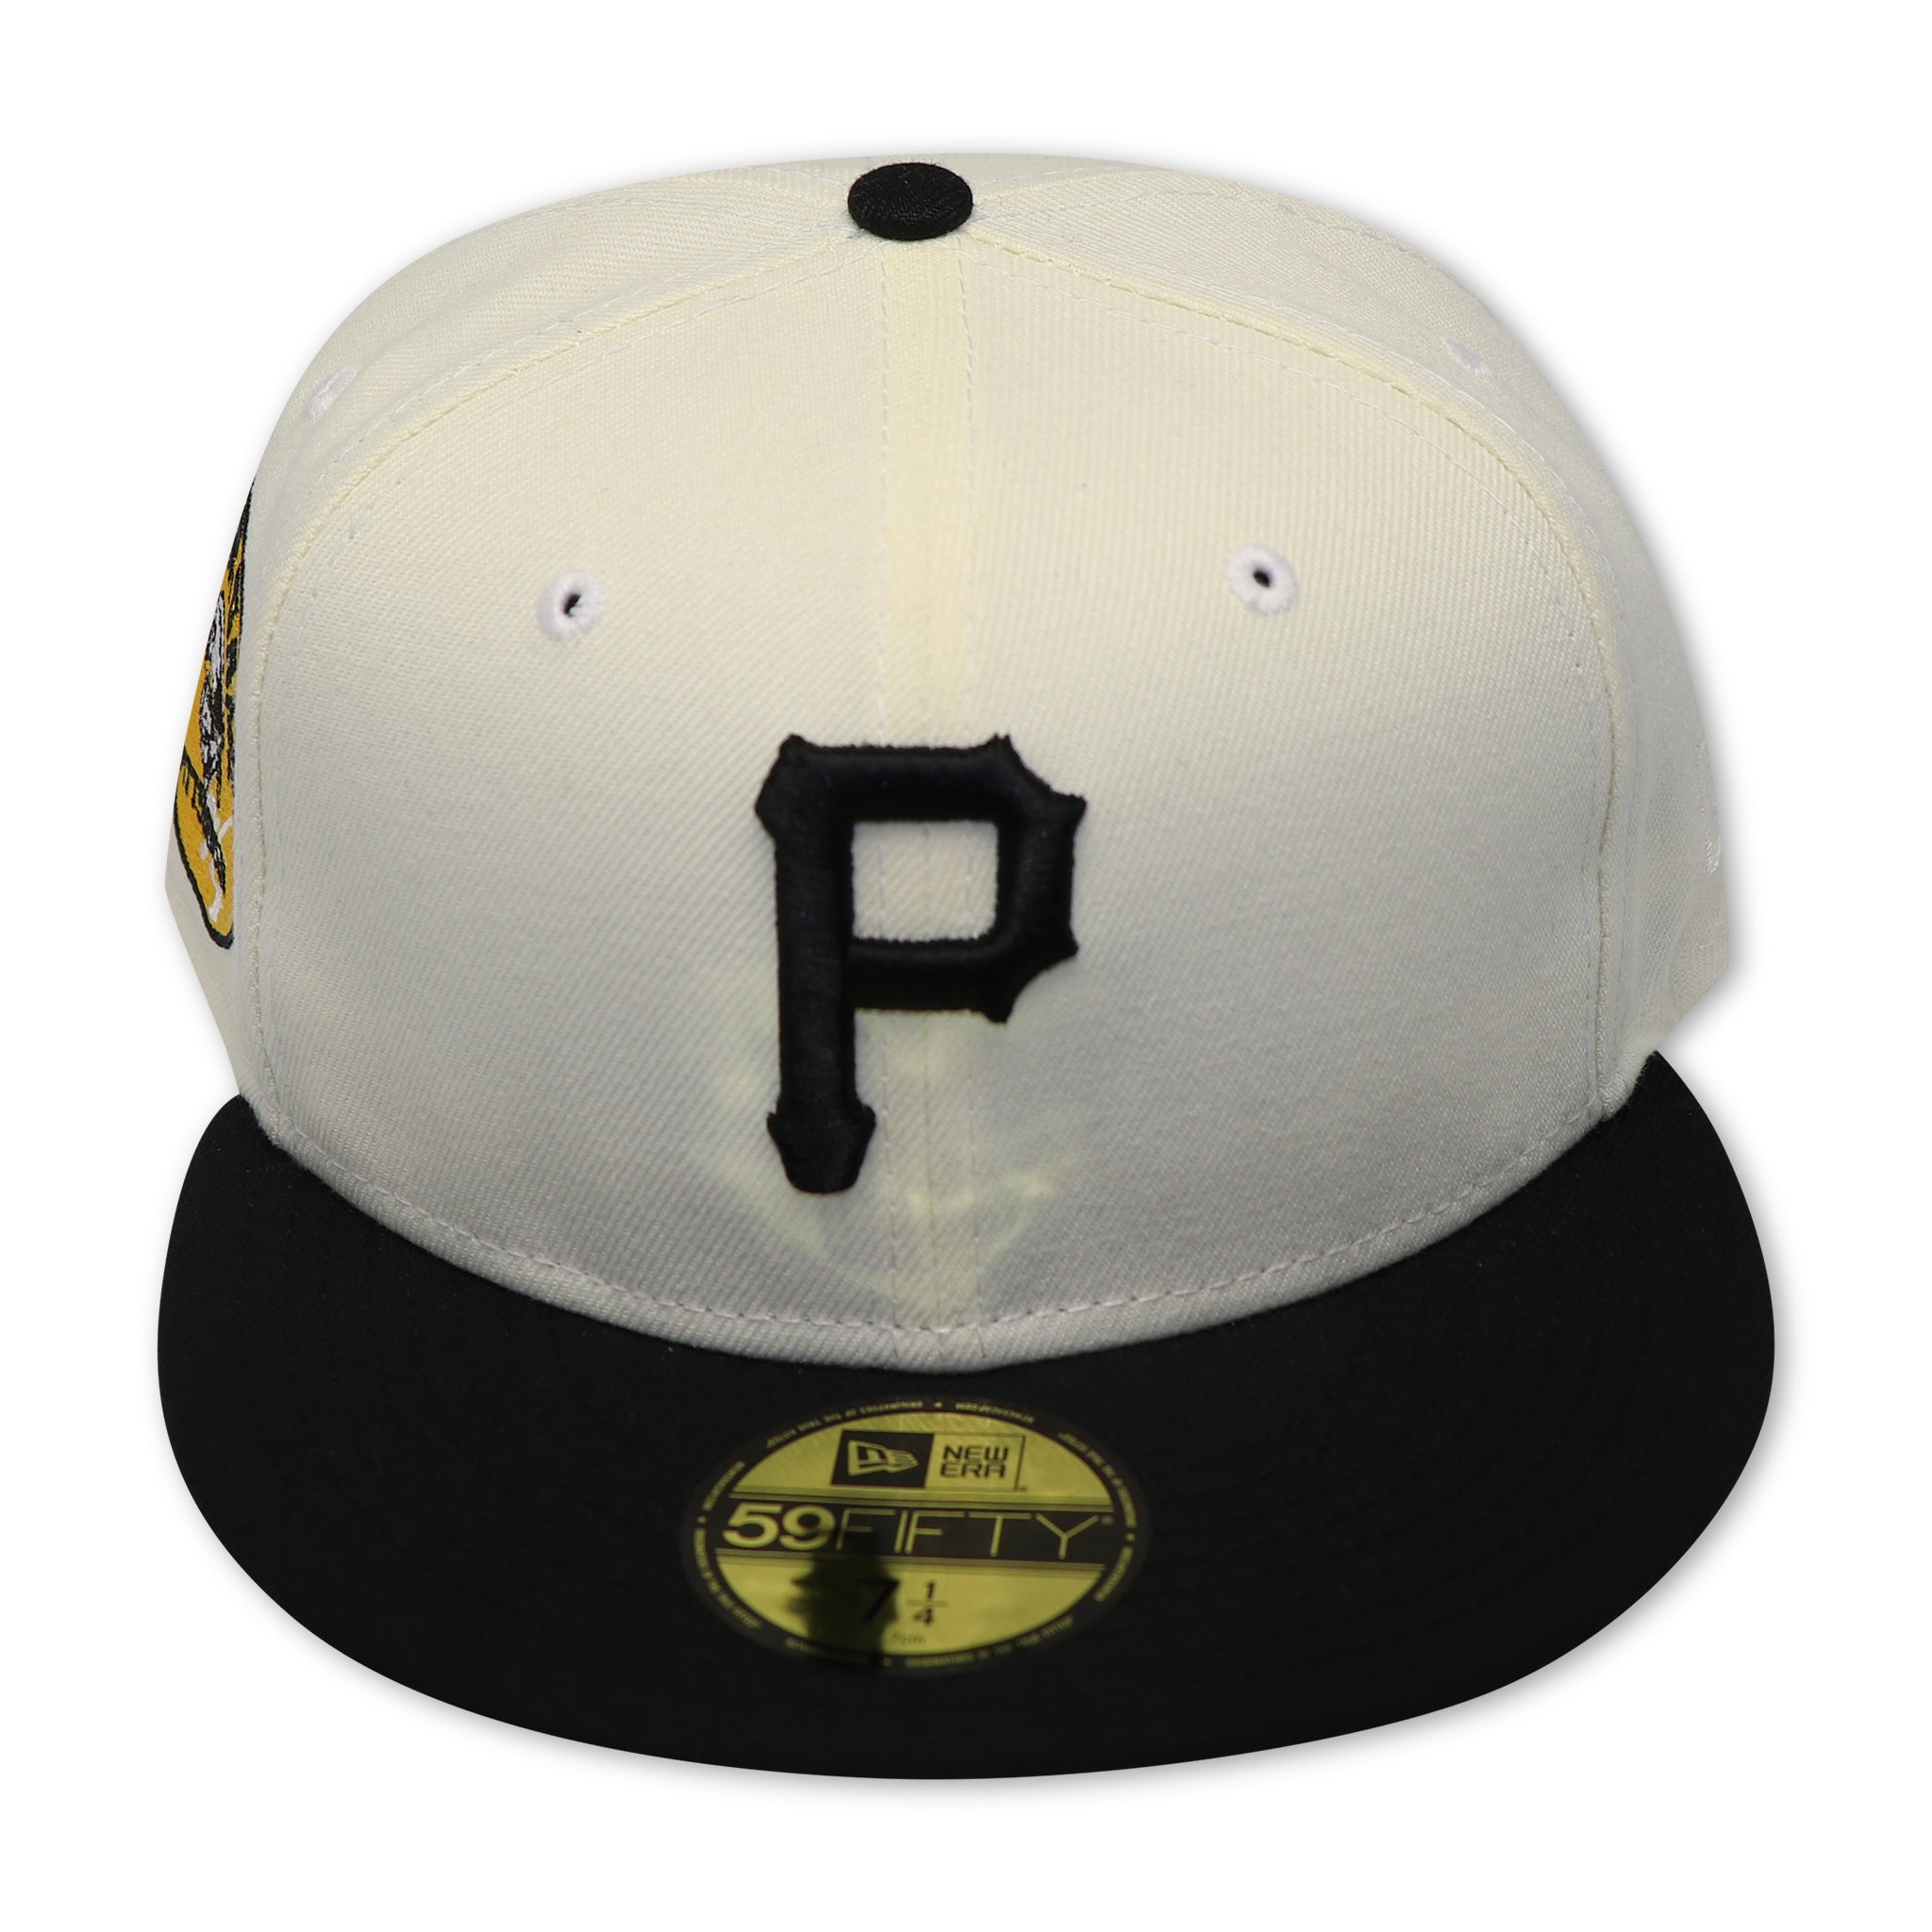 PITTSBURH PIRATES (1974 ASG) NEW ERA 59FIFTY FITTED (YELLOW UNDER VISOR)